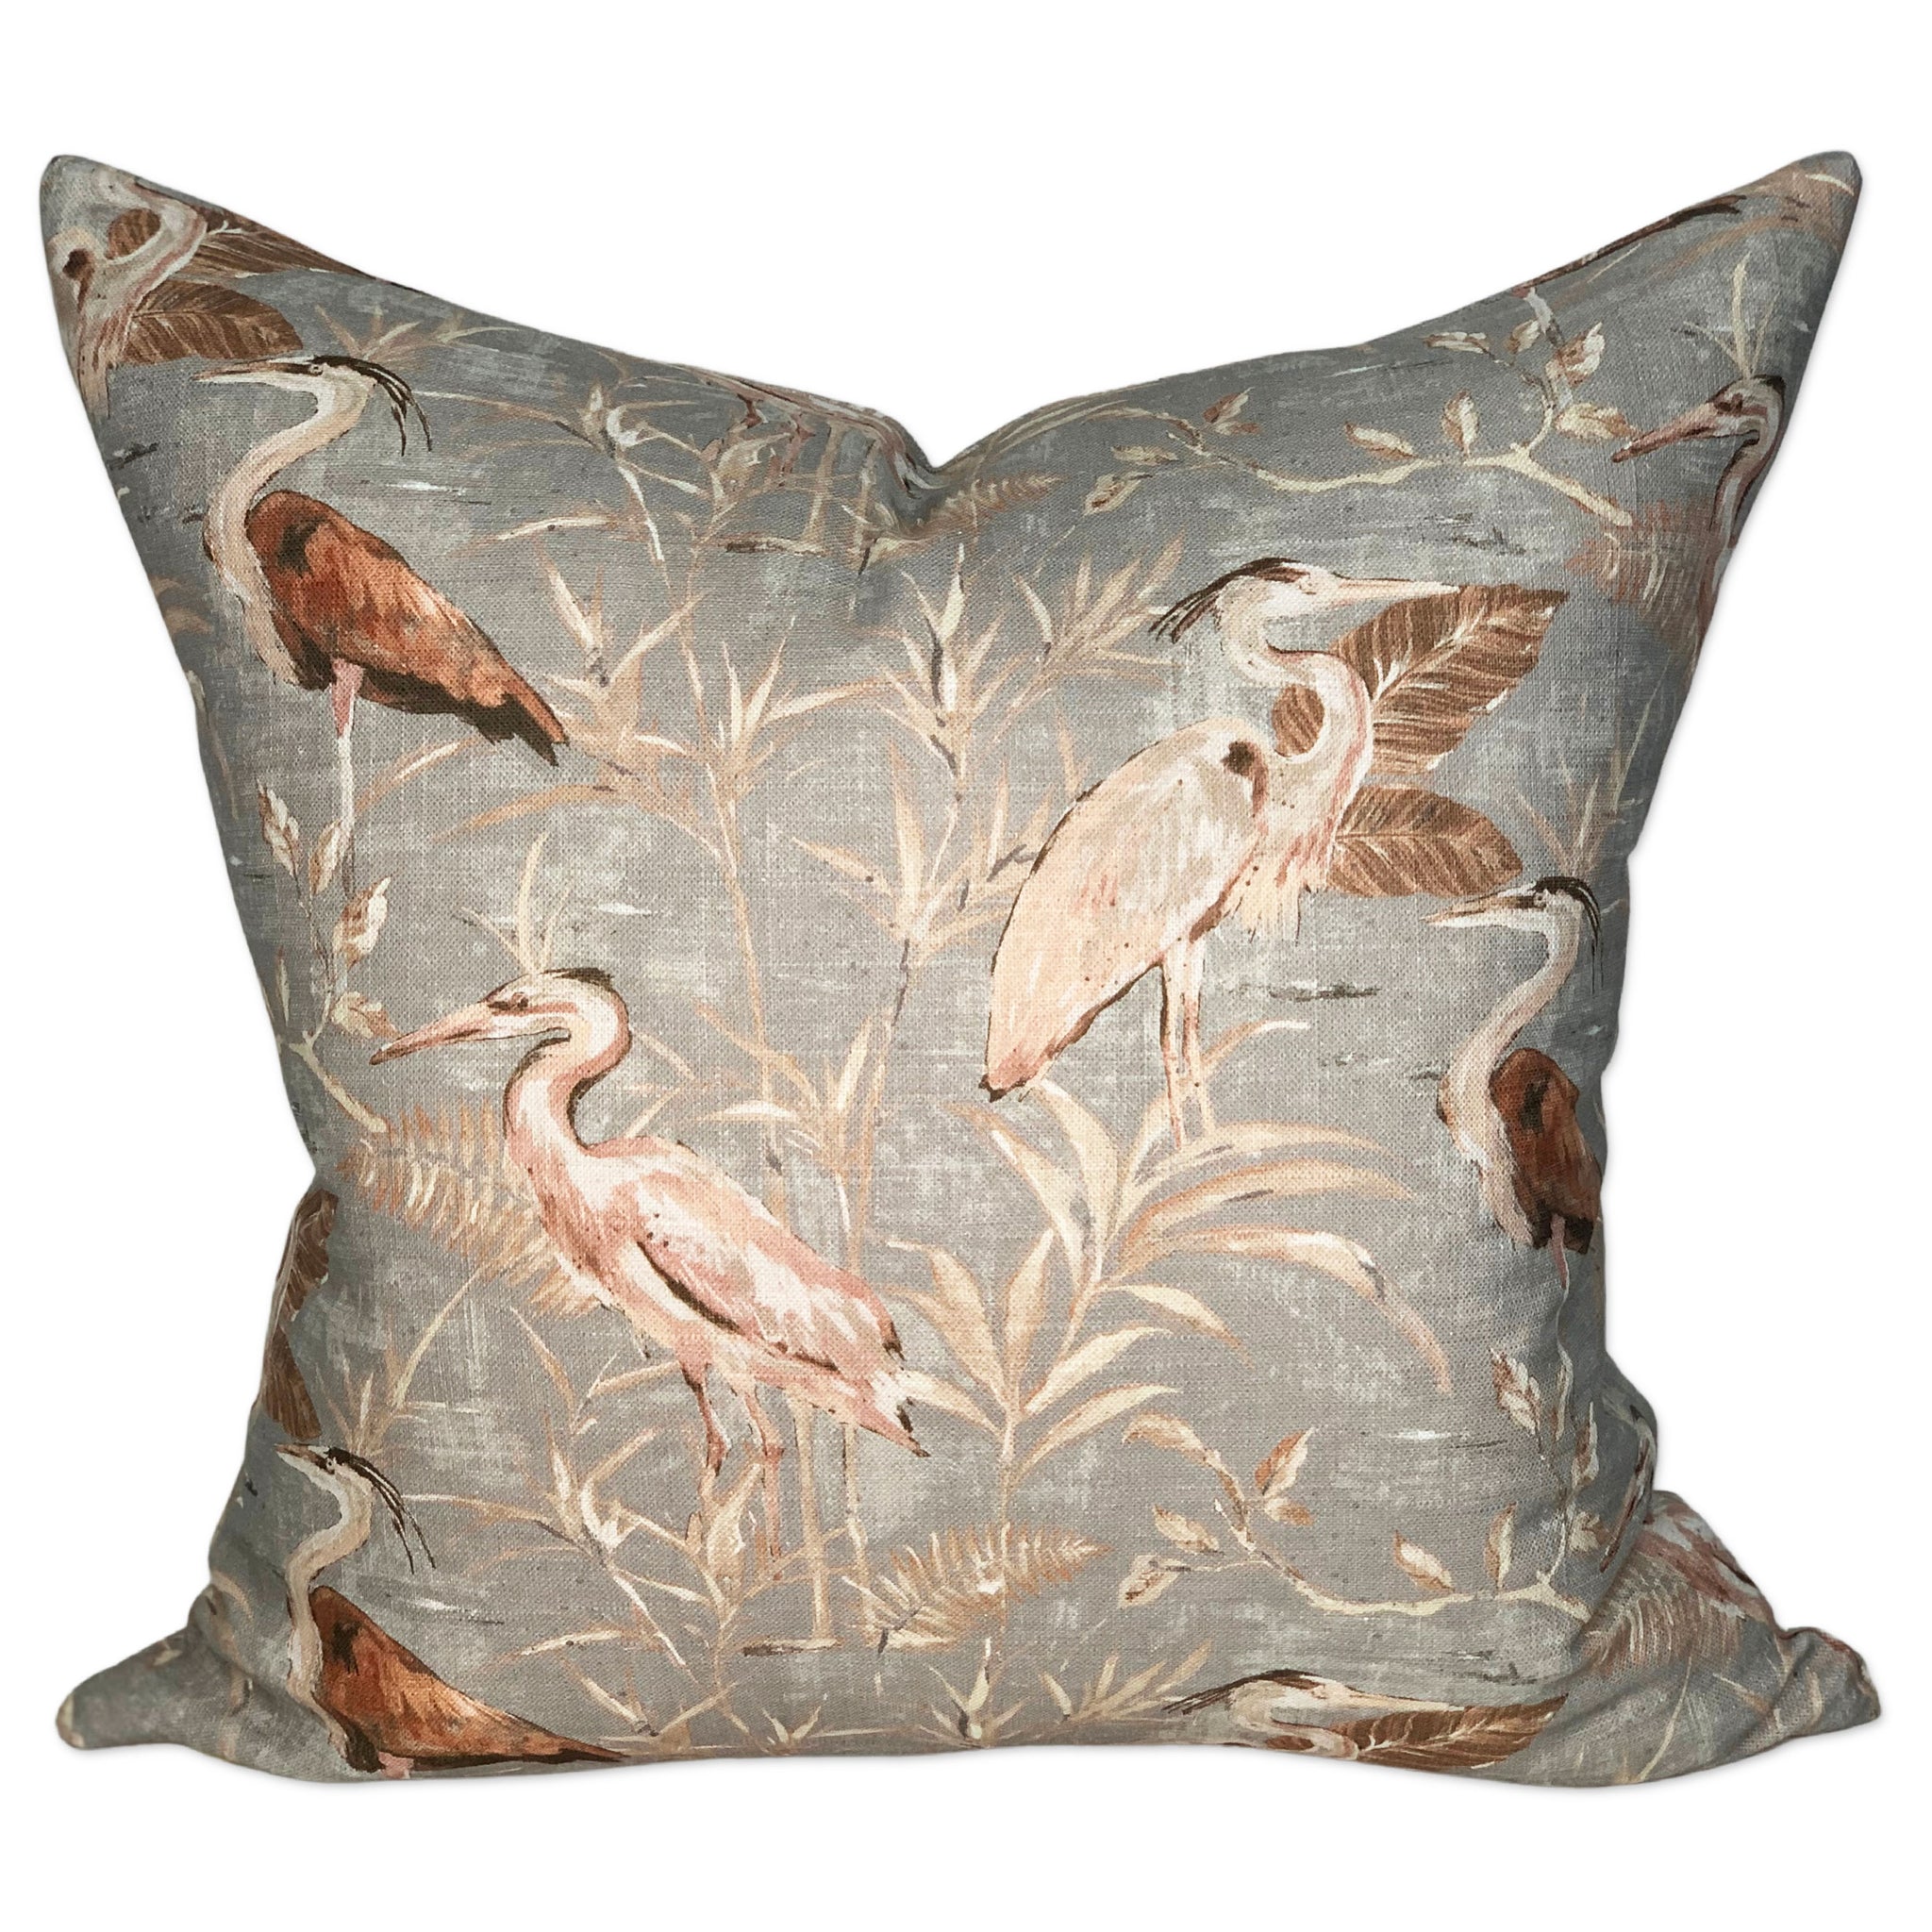 Heron Pillow Cover in Lakeside